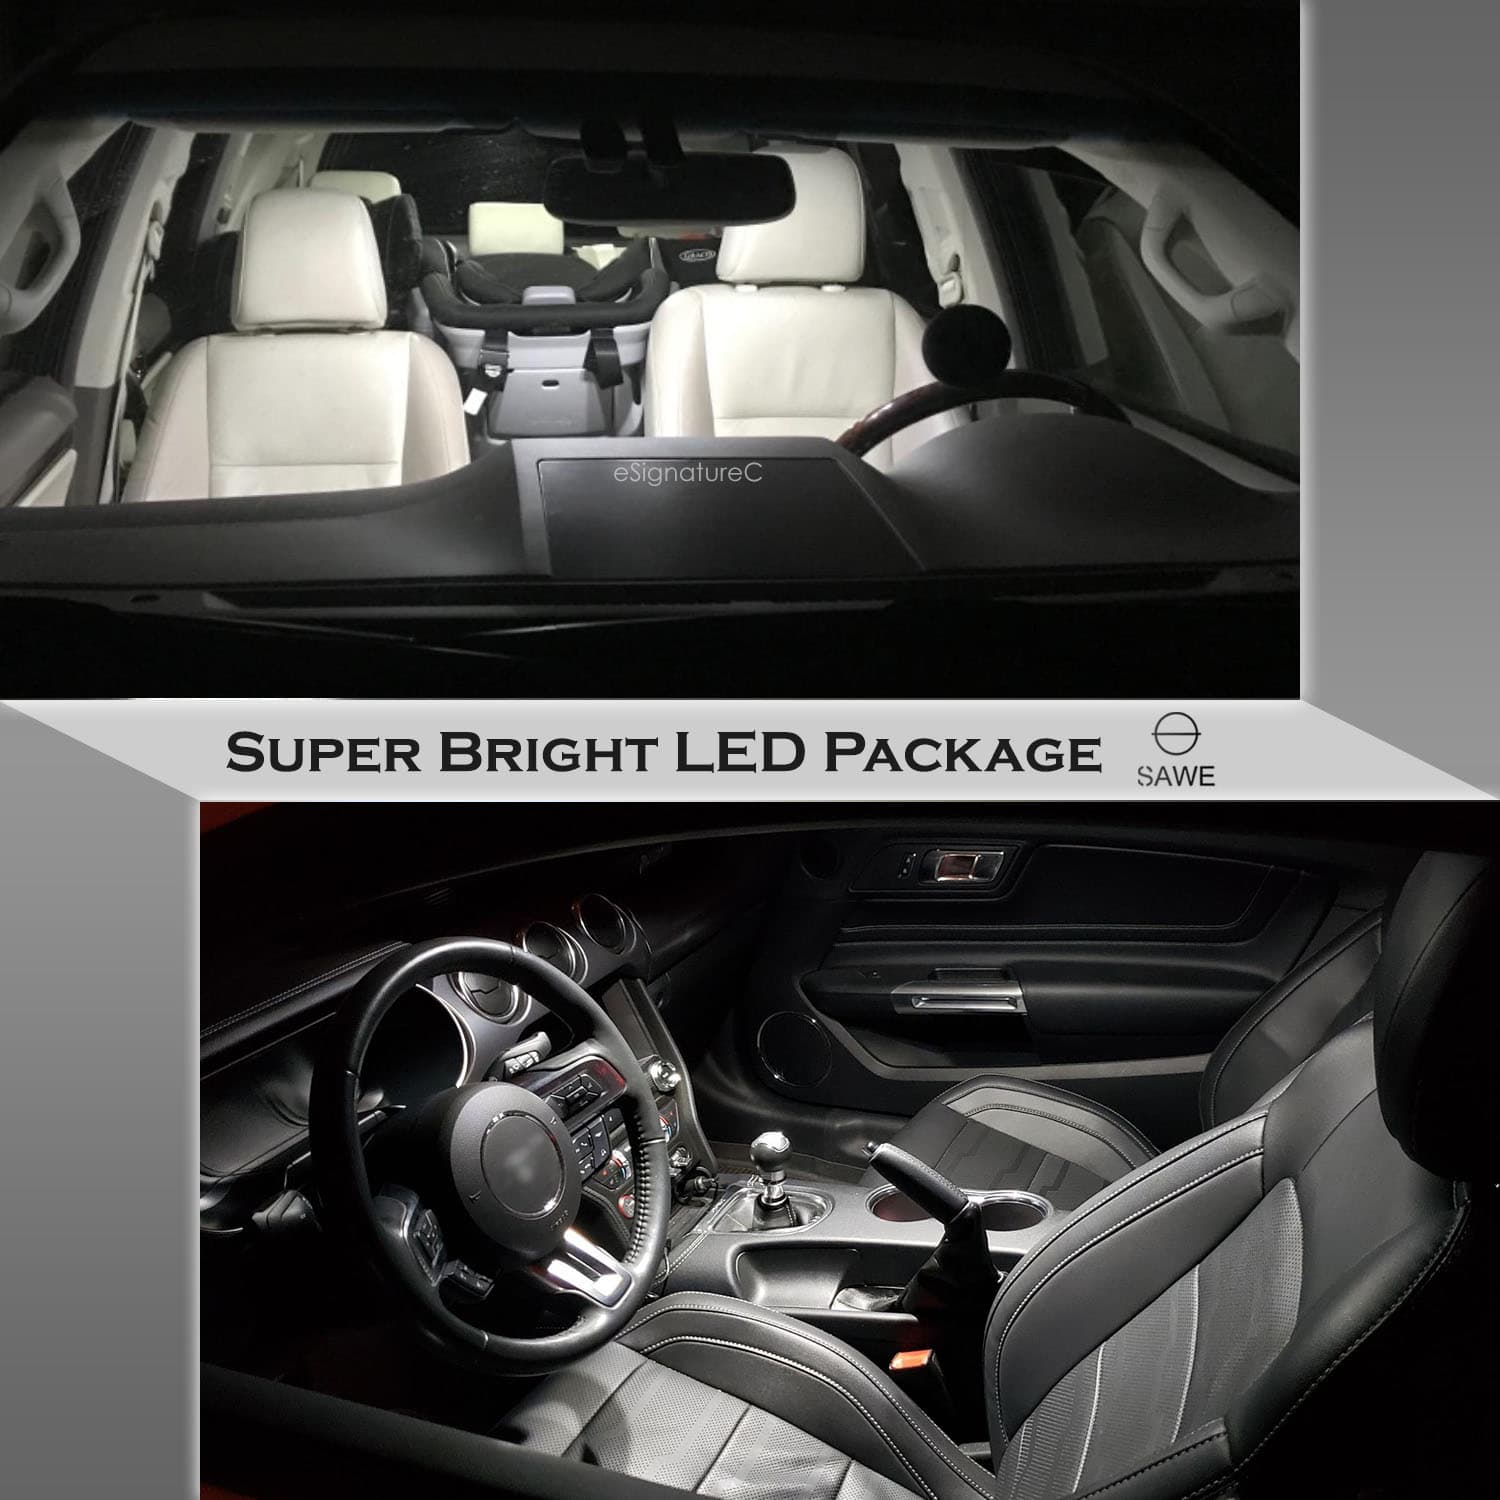 For Toyota 86 / Scion FRS Interior LED Lights - Dome & Map Lights Package Kit for 2013 - 2018 - White